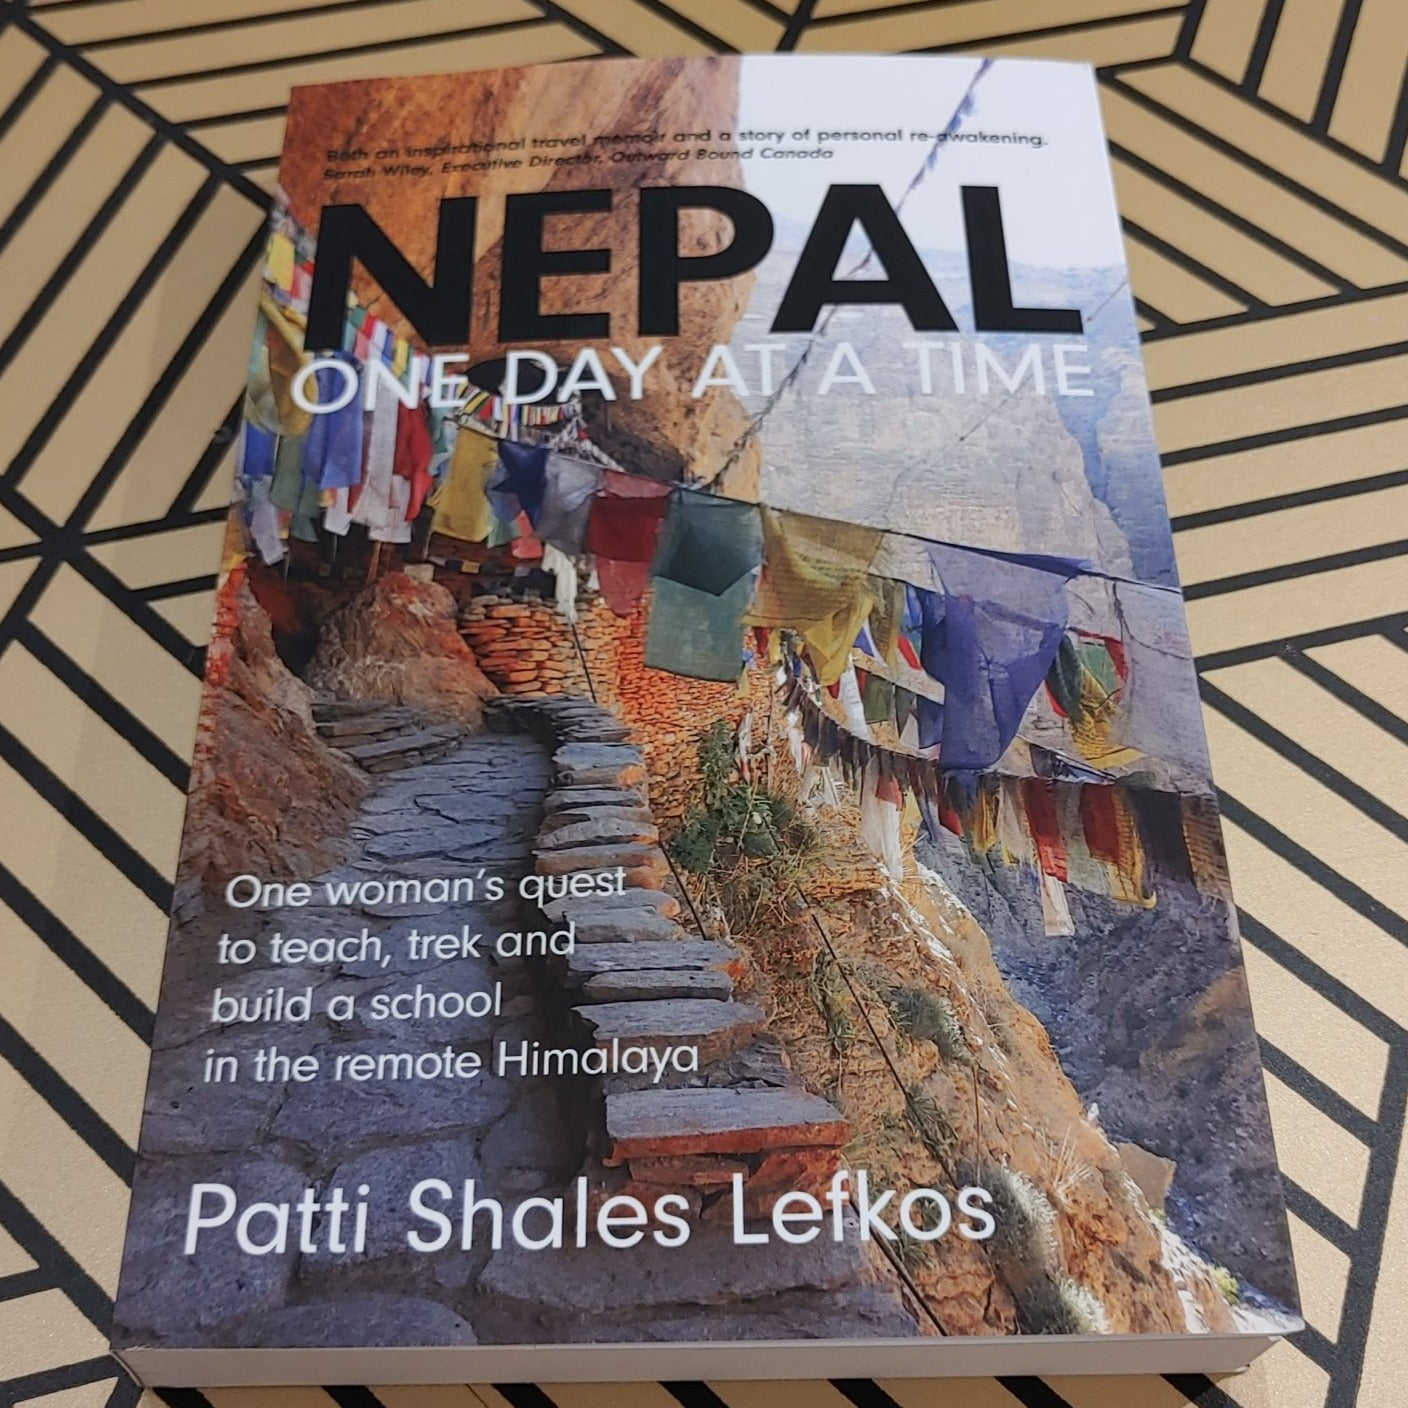 Nepal One day at a time by Patti Shales Lefkos